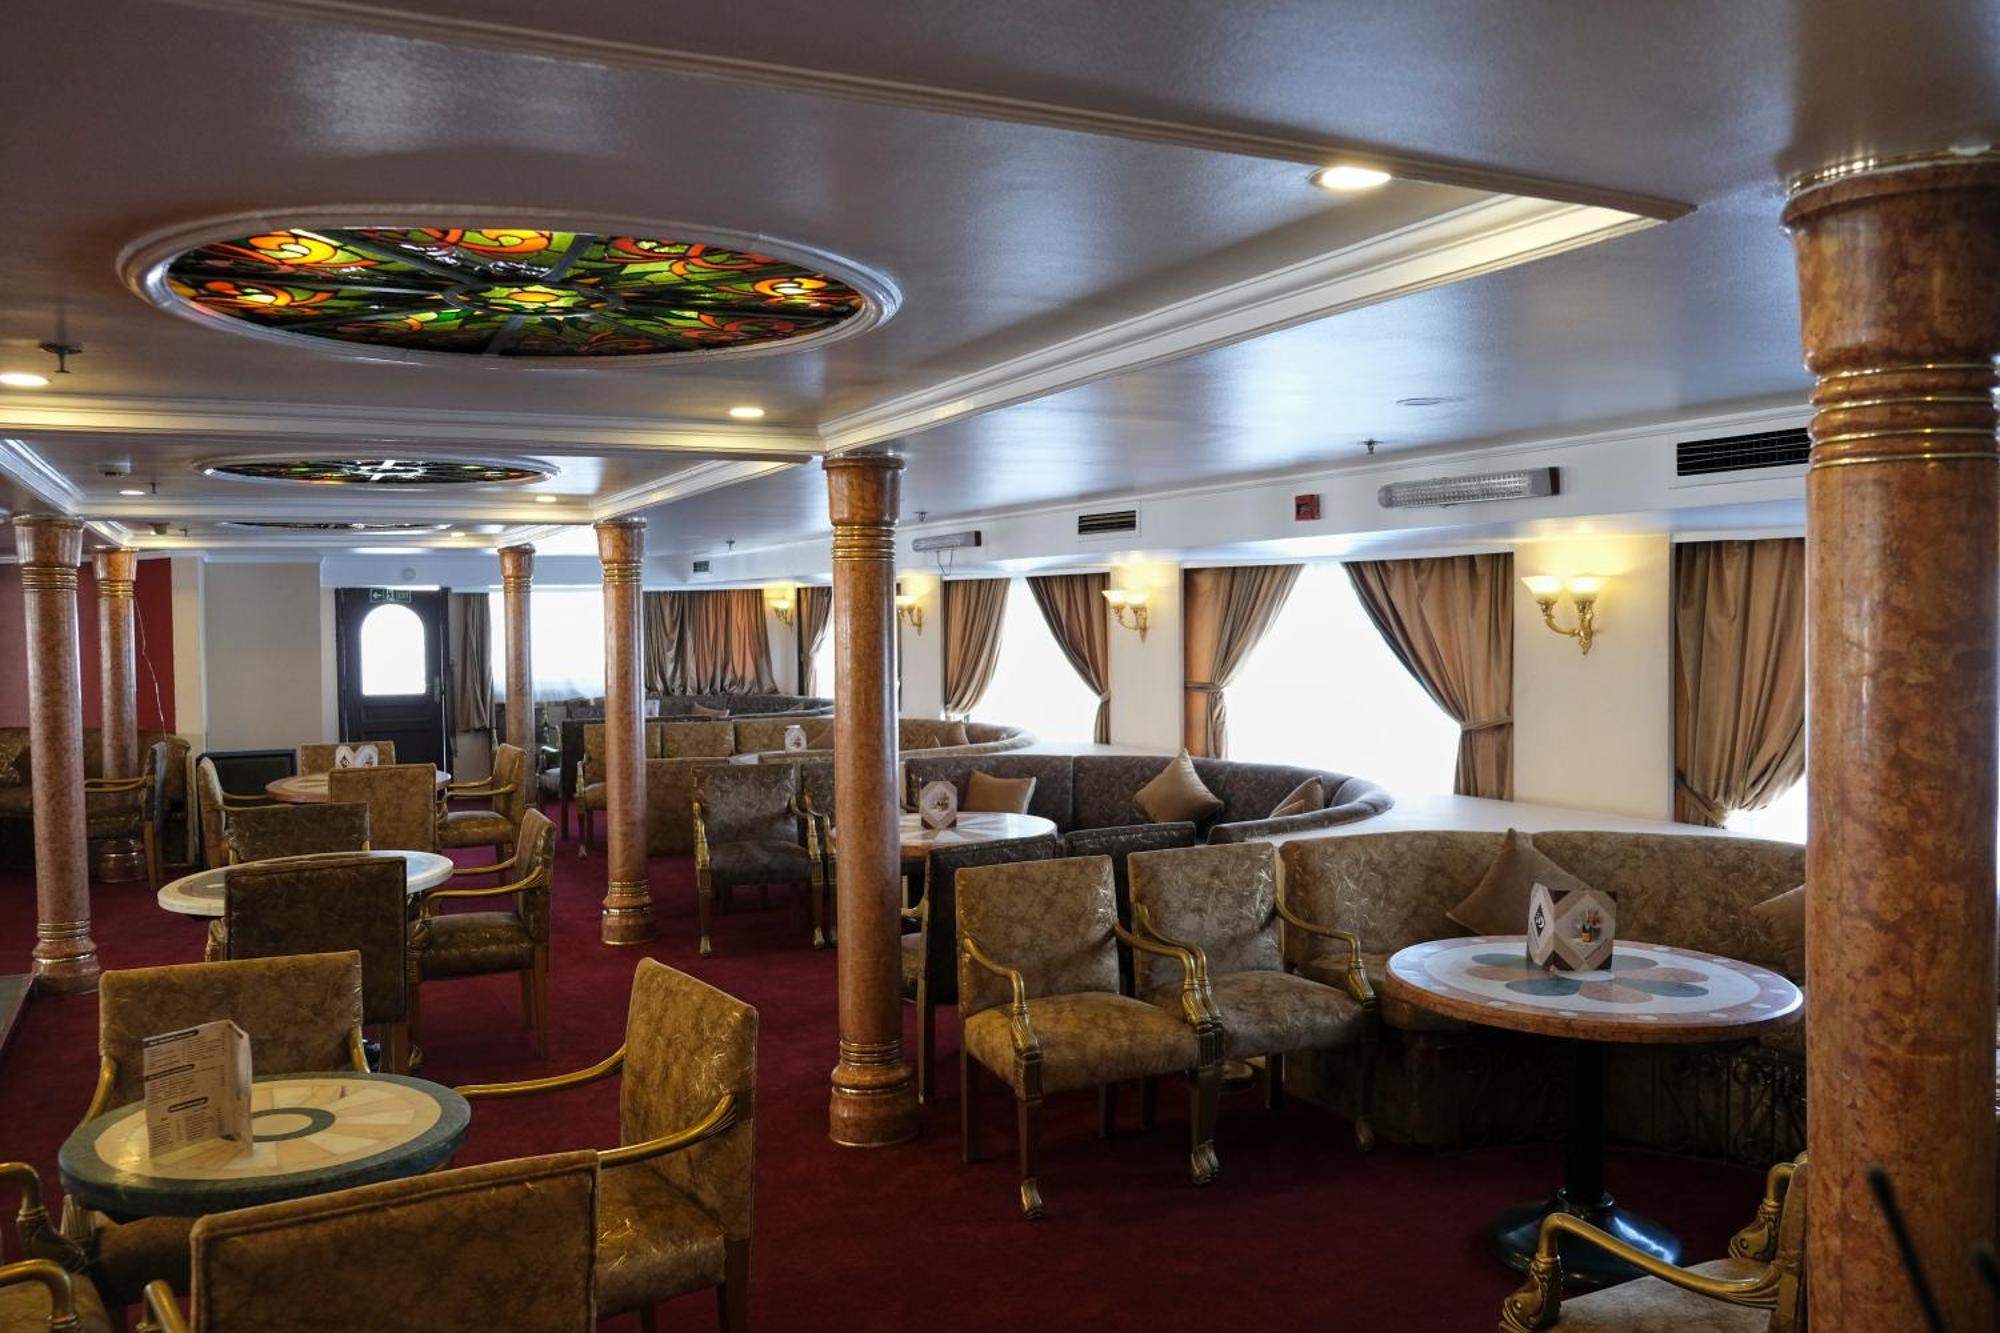 M/S Royal Adventure - Saturday From Luxor 4 Or 7 Nights - Wednesday From Aswan 3 Or 7 Nights Hotel Ngoại thất bức ảnh